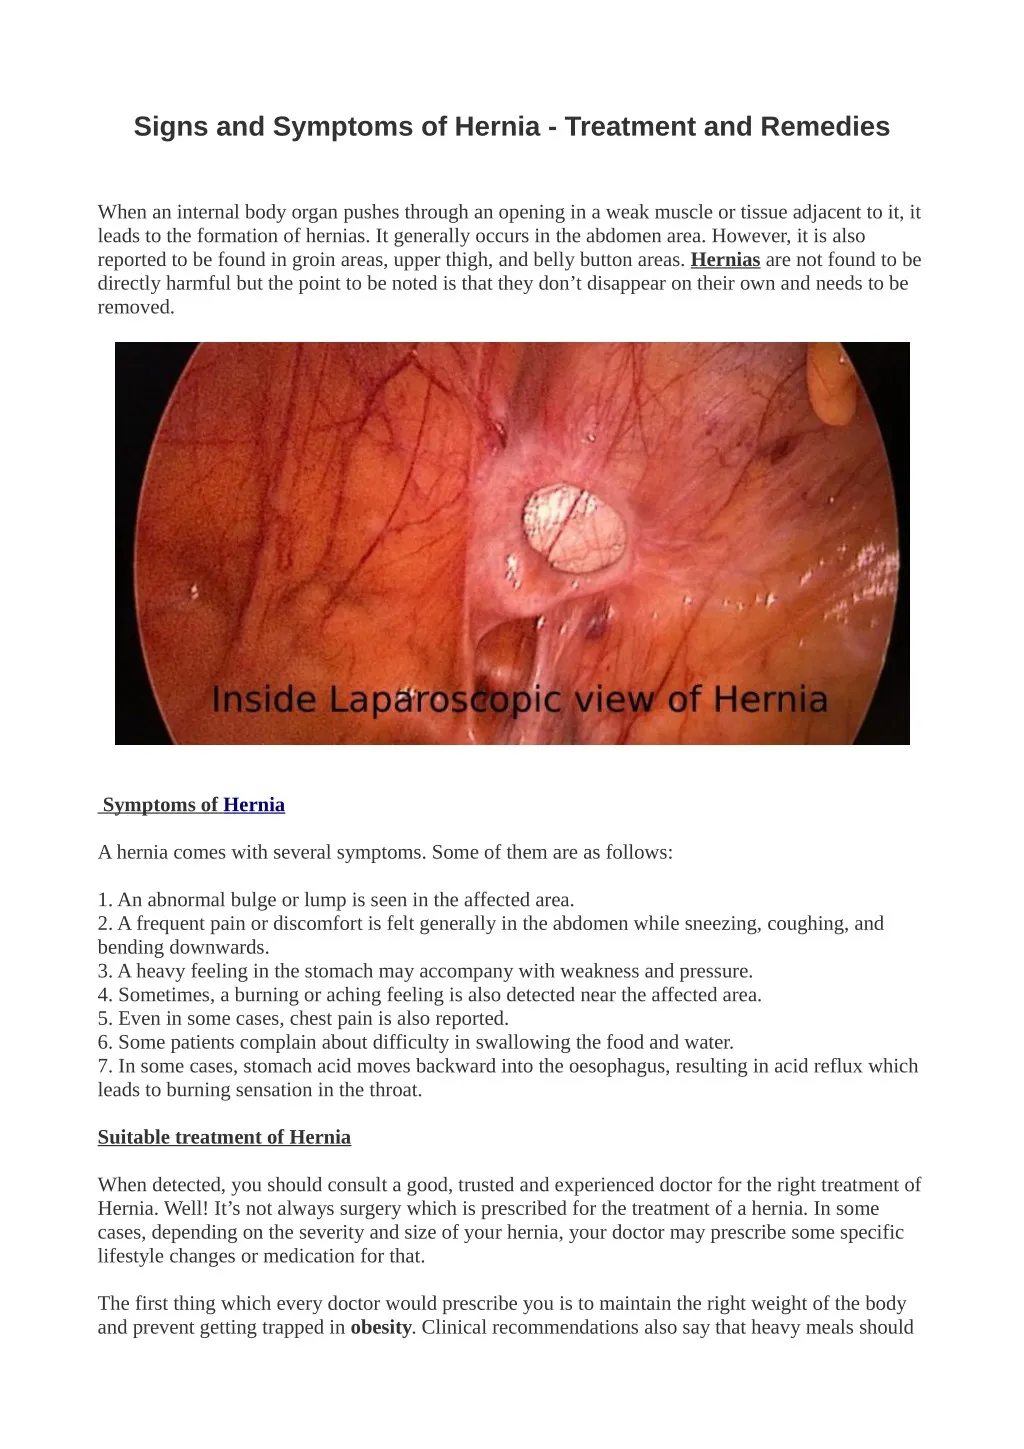 signs and symptoms of hernia treatment